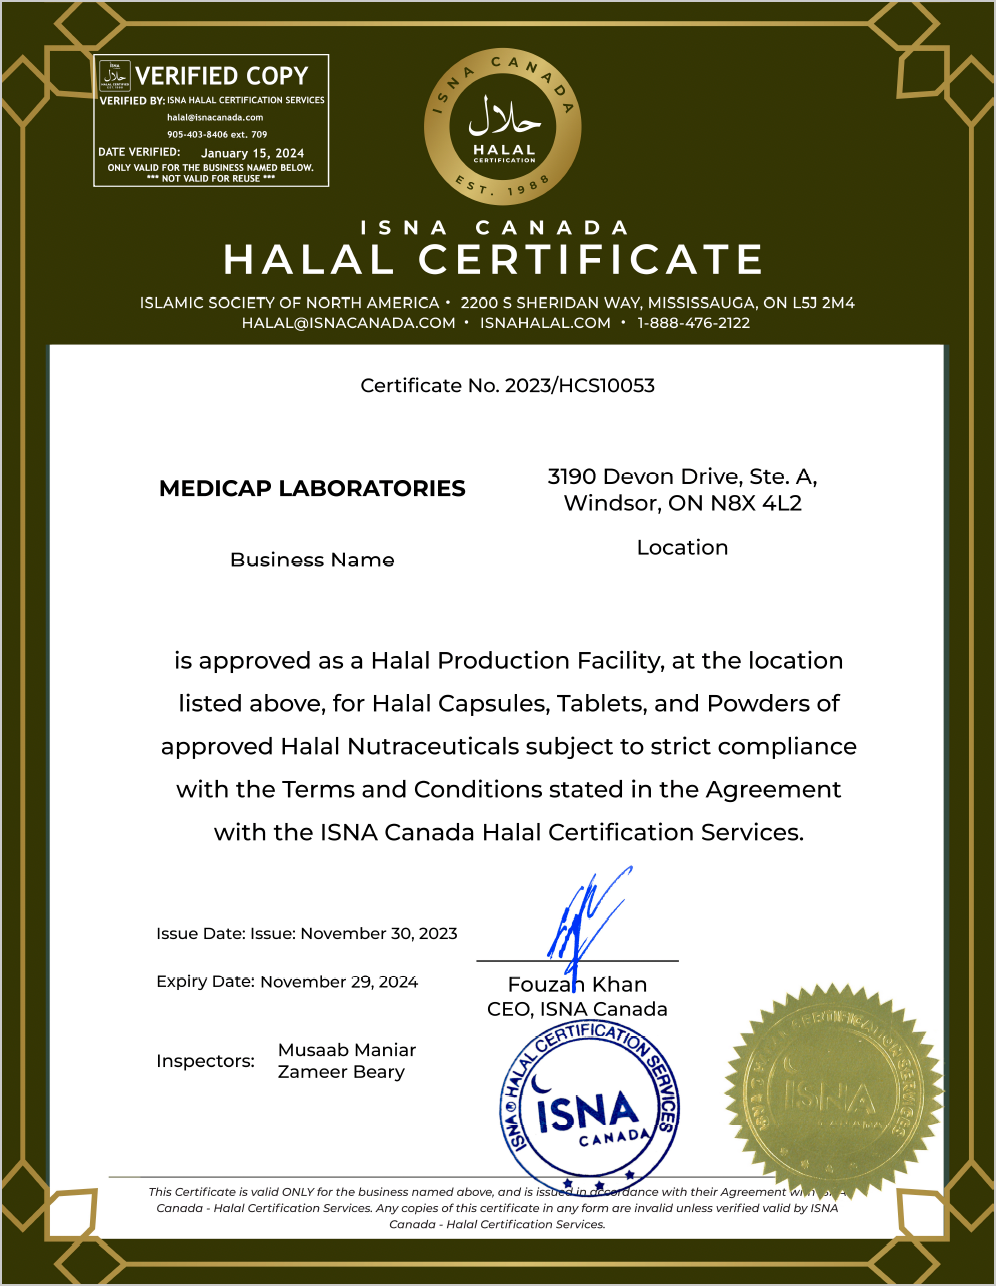 Medicap is  ISNA Halal certified Laboratory. Come check out our website for your nutraceutical contract manufacturing needs.